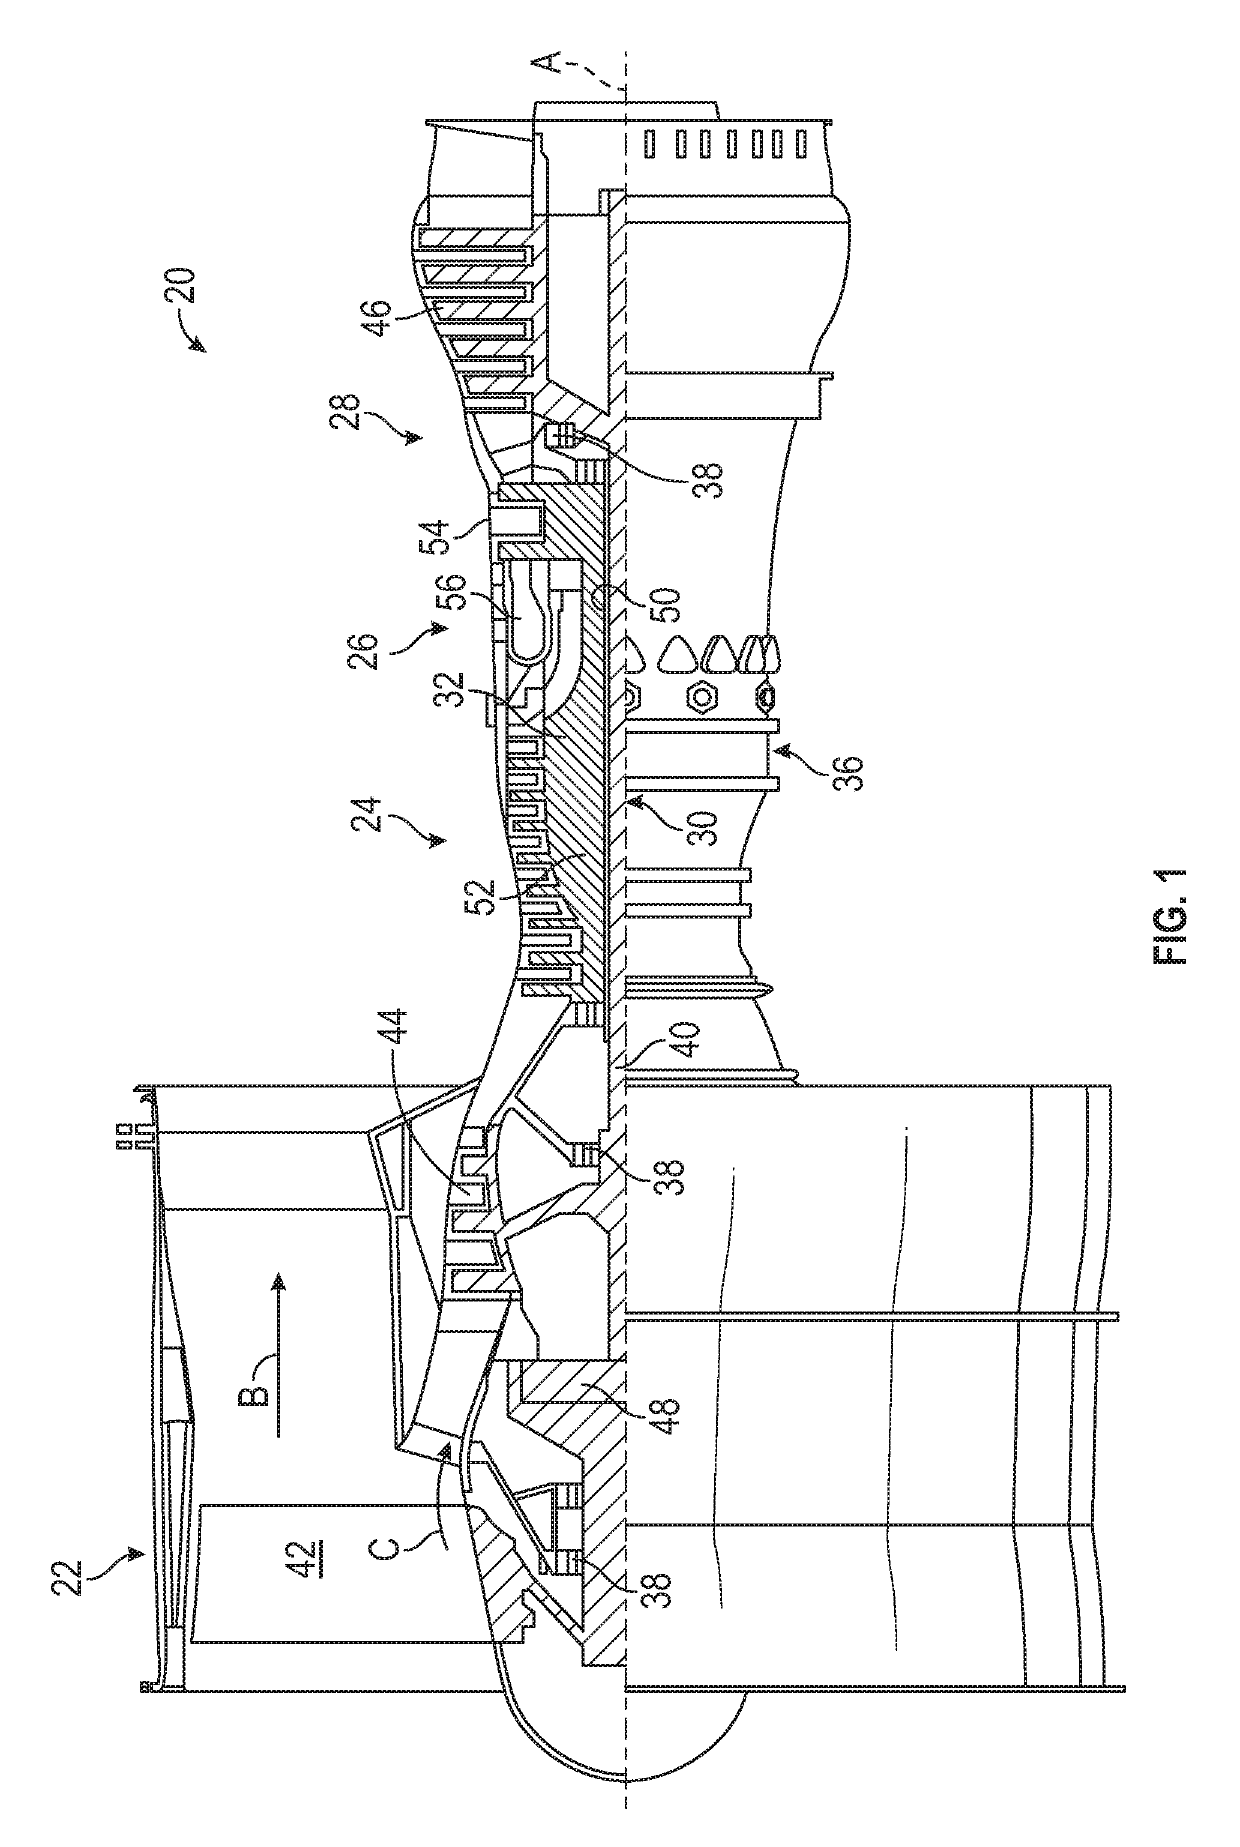 Cryogenic cooling system for an aircraft